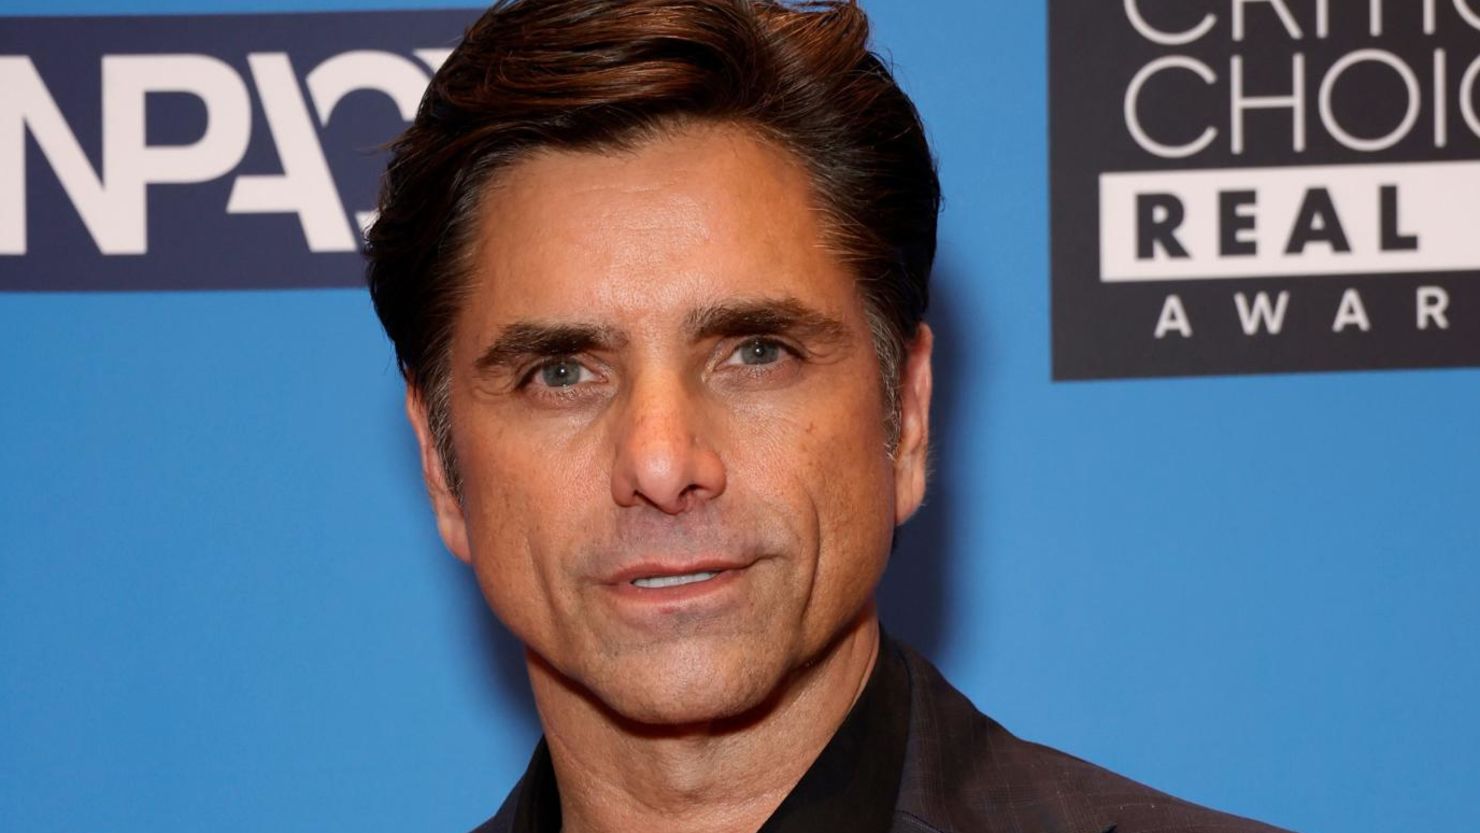 John Stamos at the 4th Annual Critics Choice Real TV Awards in Los Angeles in 2022. 